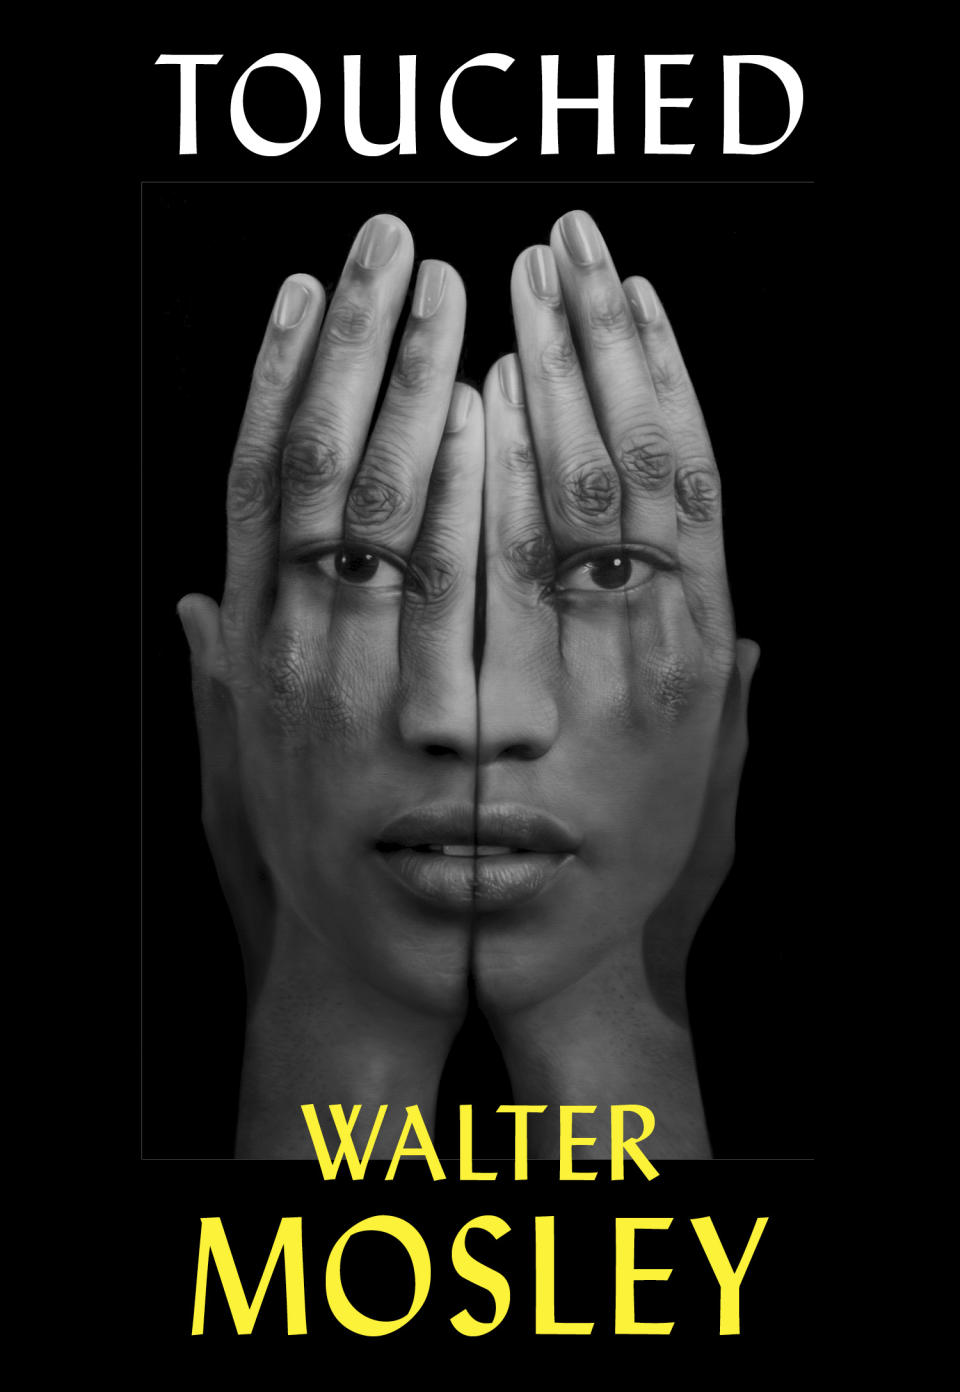 This cover image released by Atlantic Monthly Press shows "Touched" by Walter Mosley. (Atlantic Monthly Press via AP)